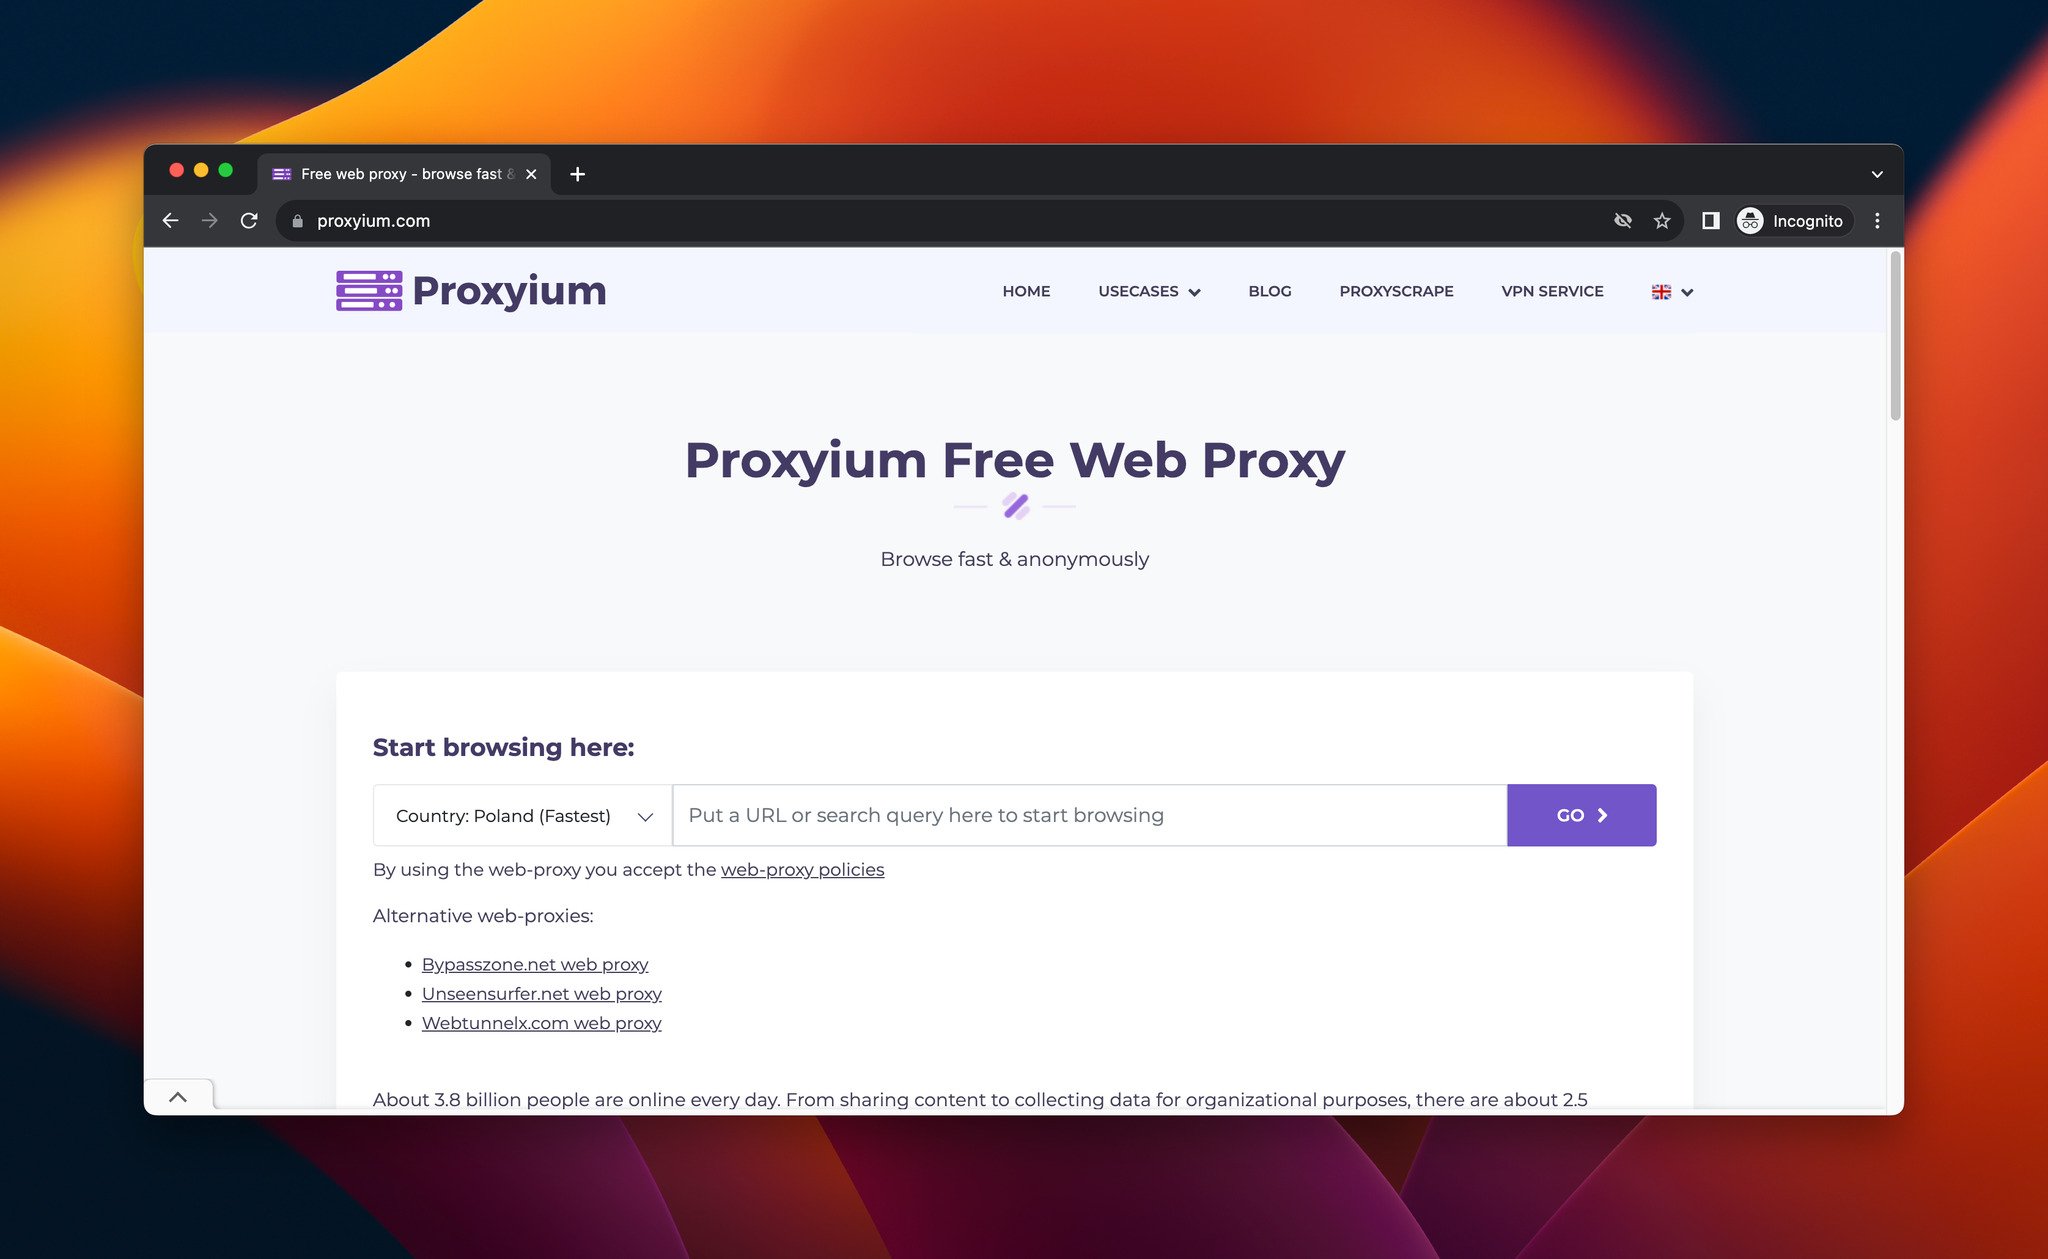 A screenshot of the homepage of Proxyium, which is a free web proxy